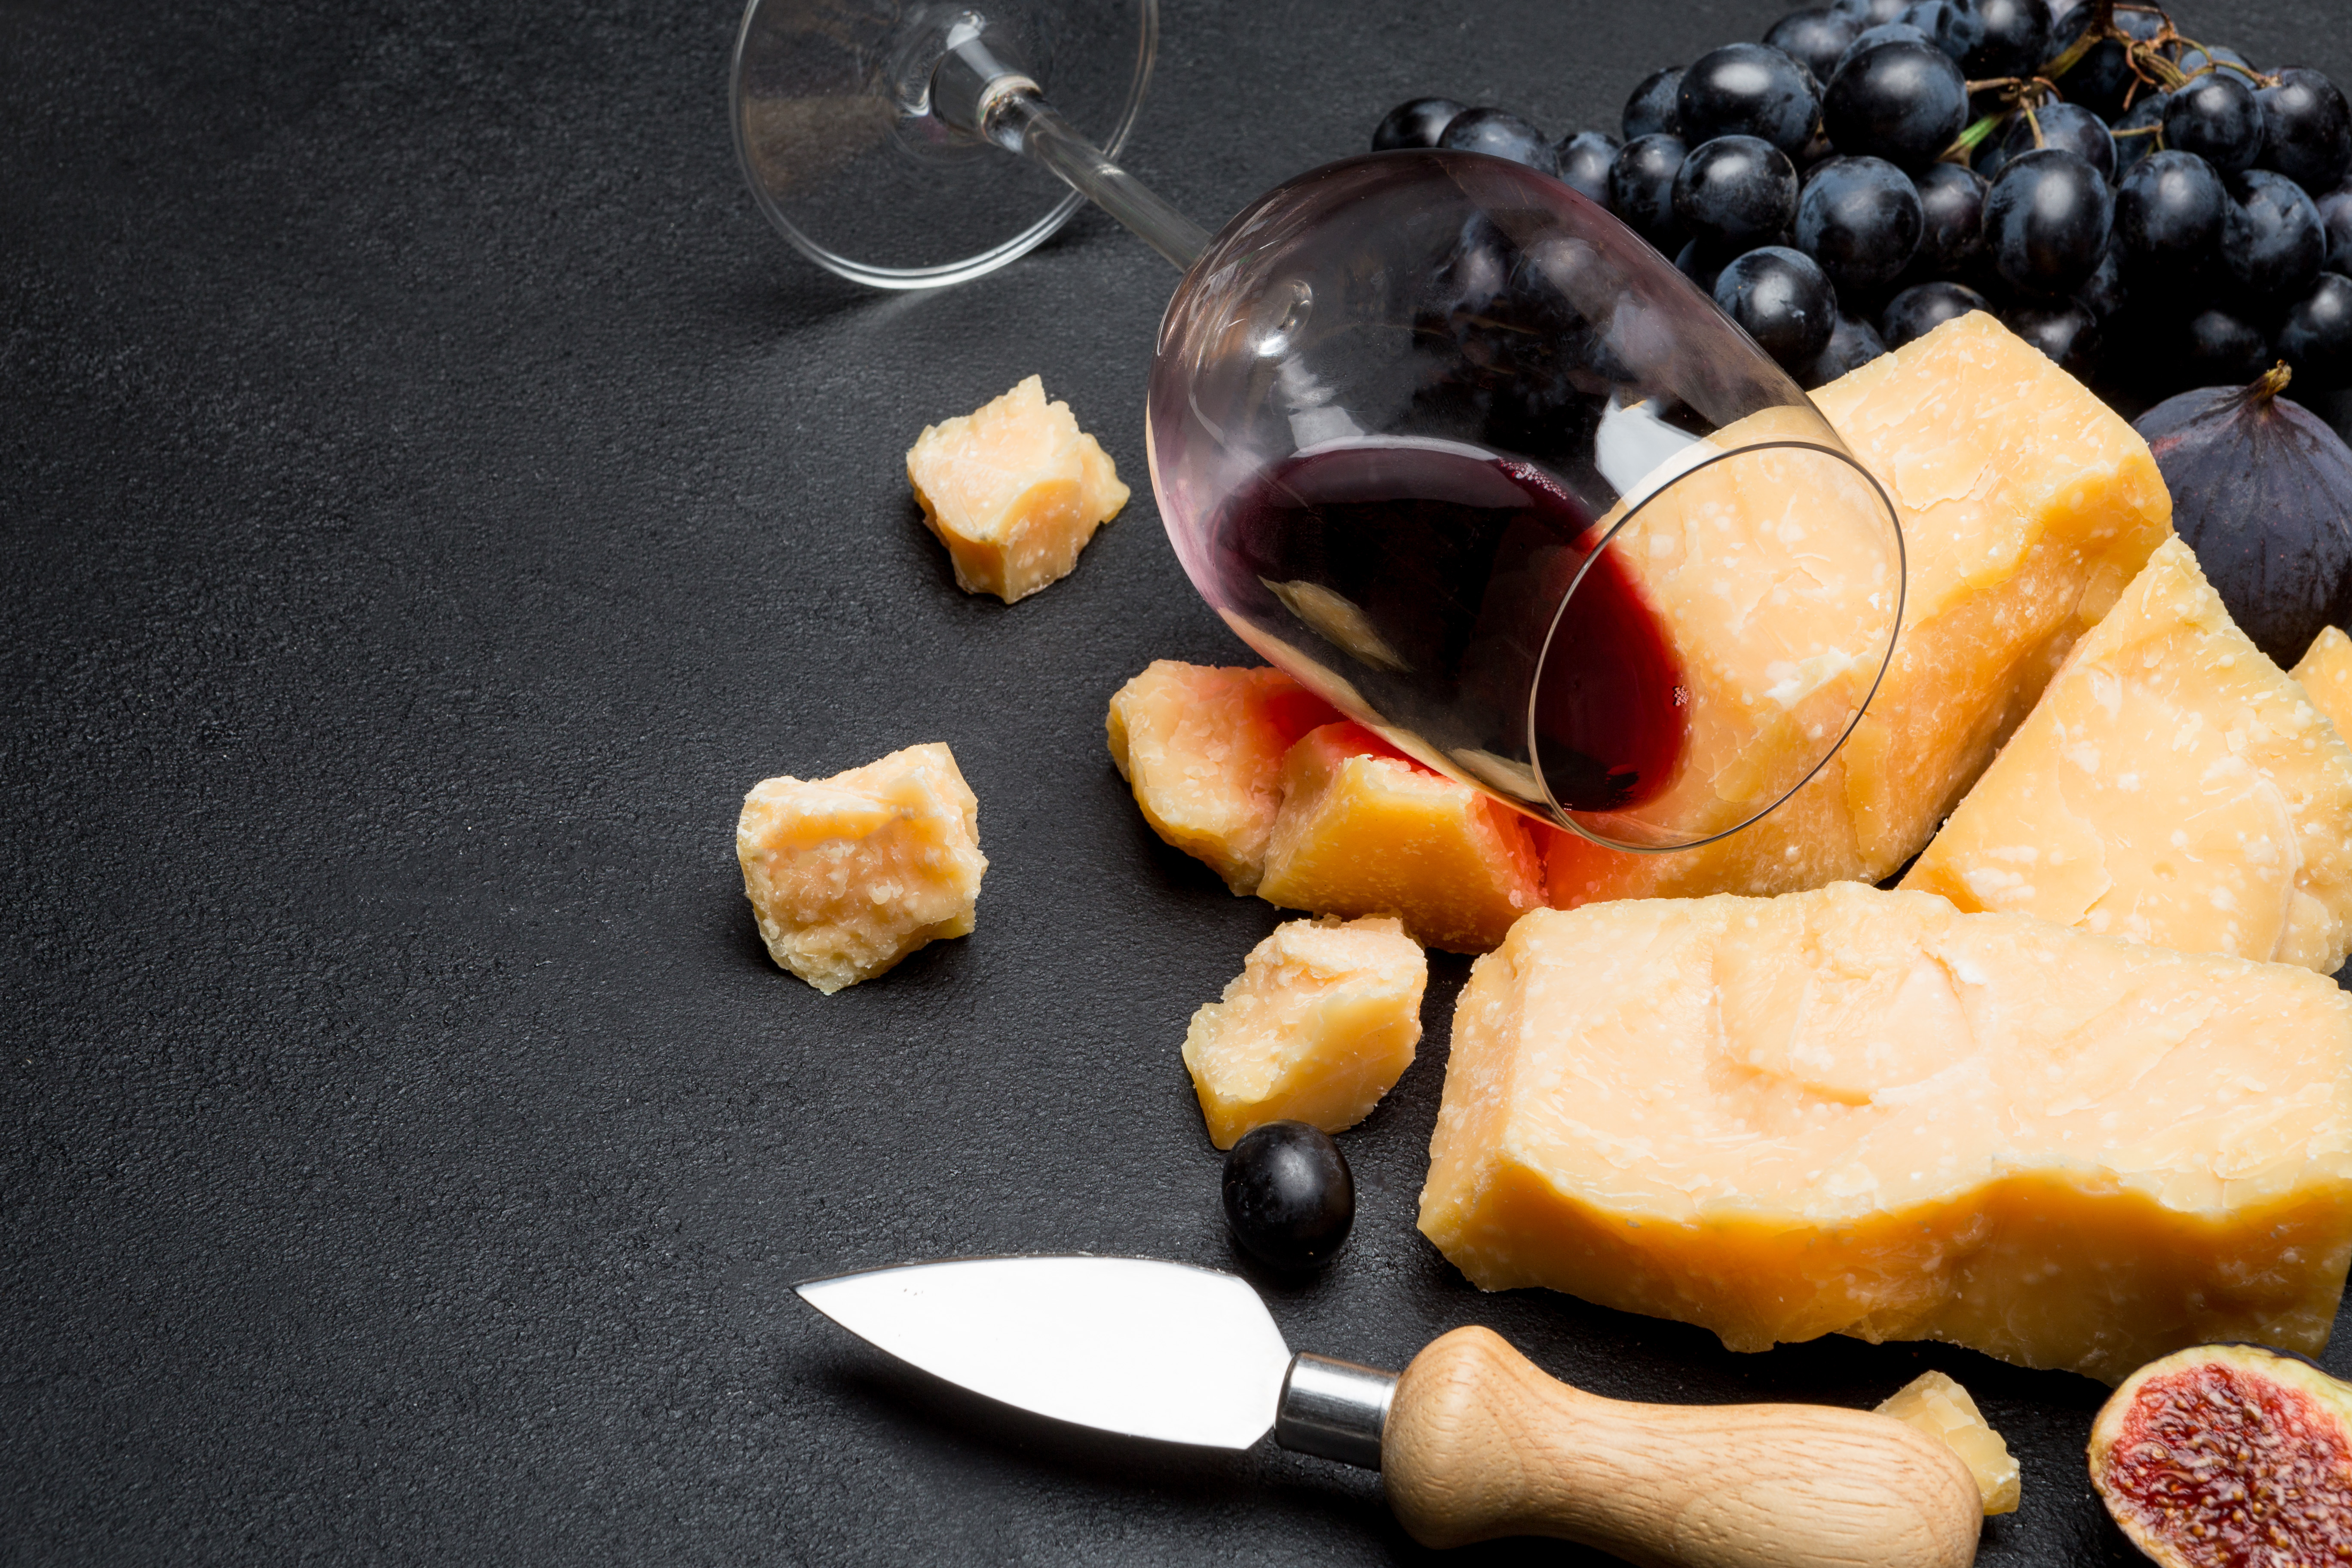 Spanish Wine and Cheese Pairing: A Match Made in Culinary Heaven